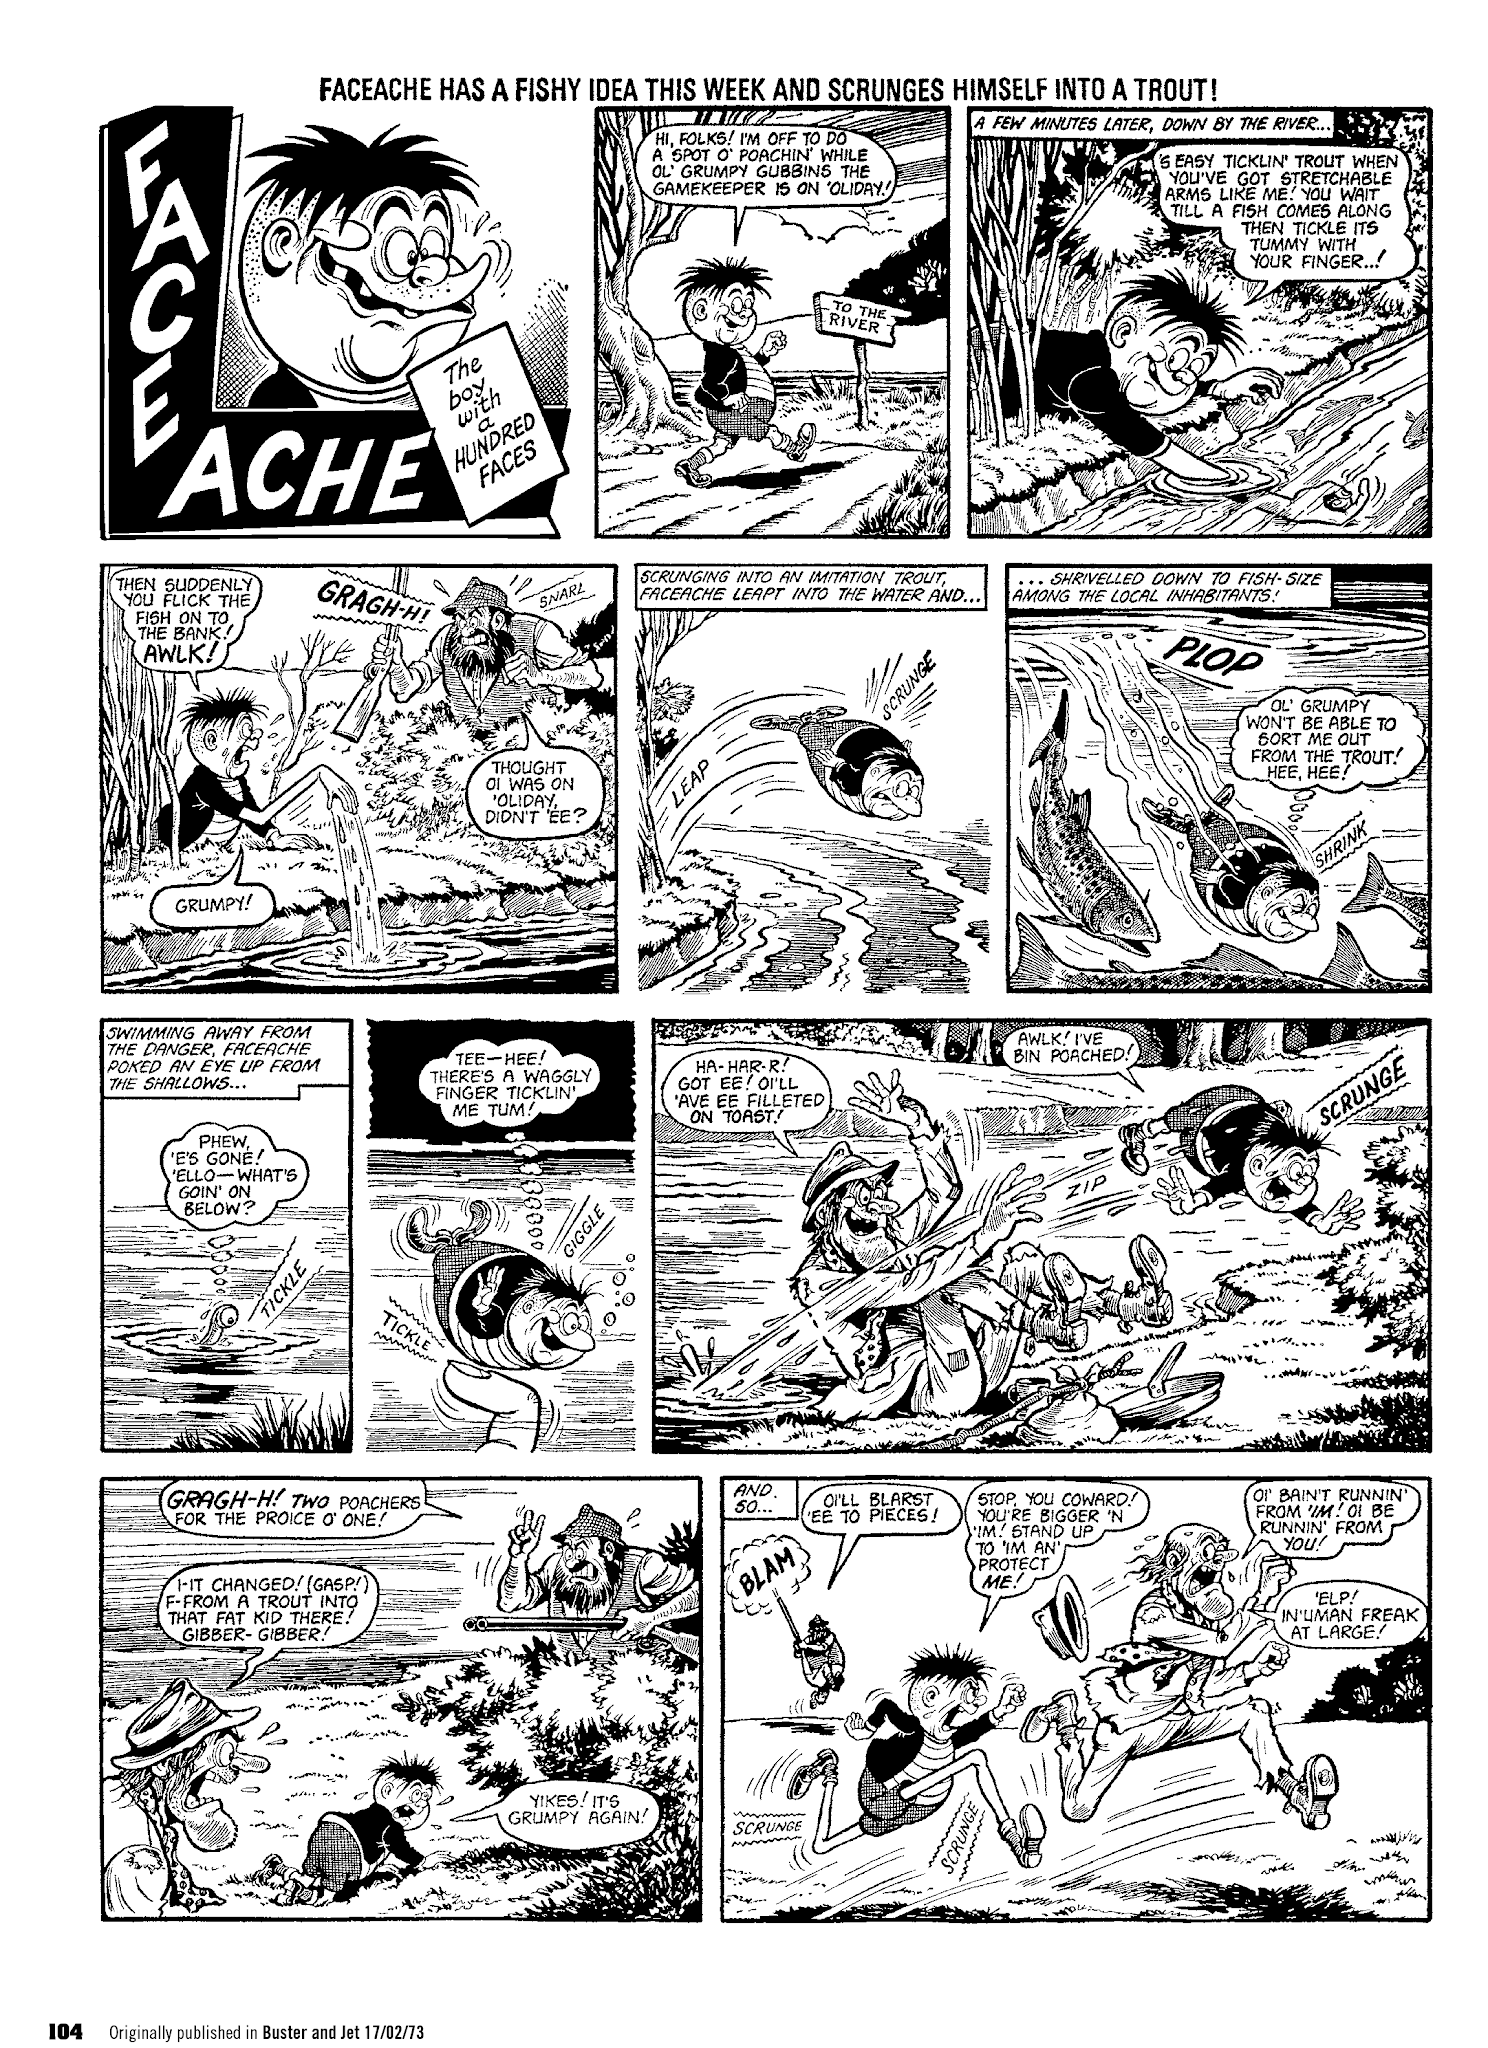 Read online Faceache: The First Hundred Scrunges comic -  Issue # TPB 1 - 106